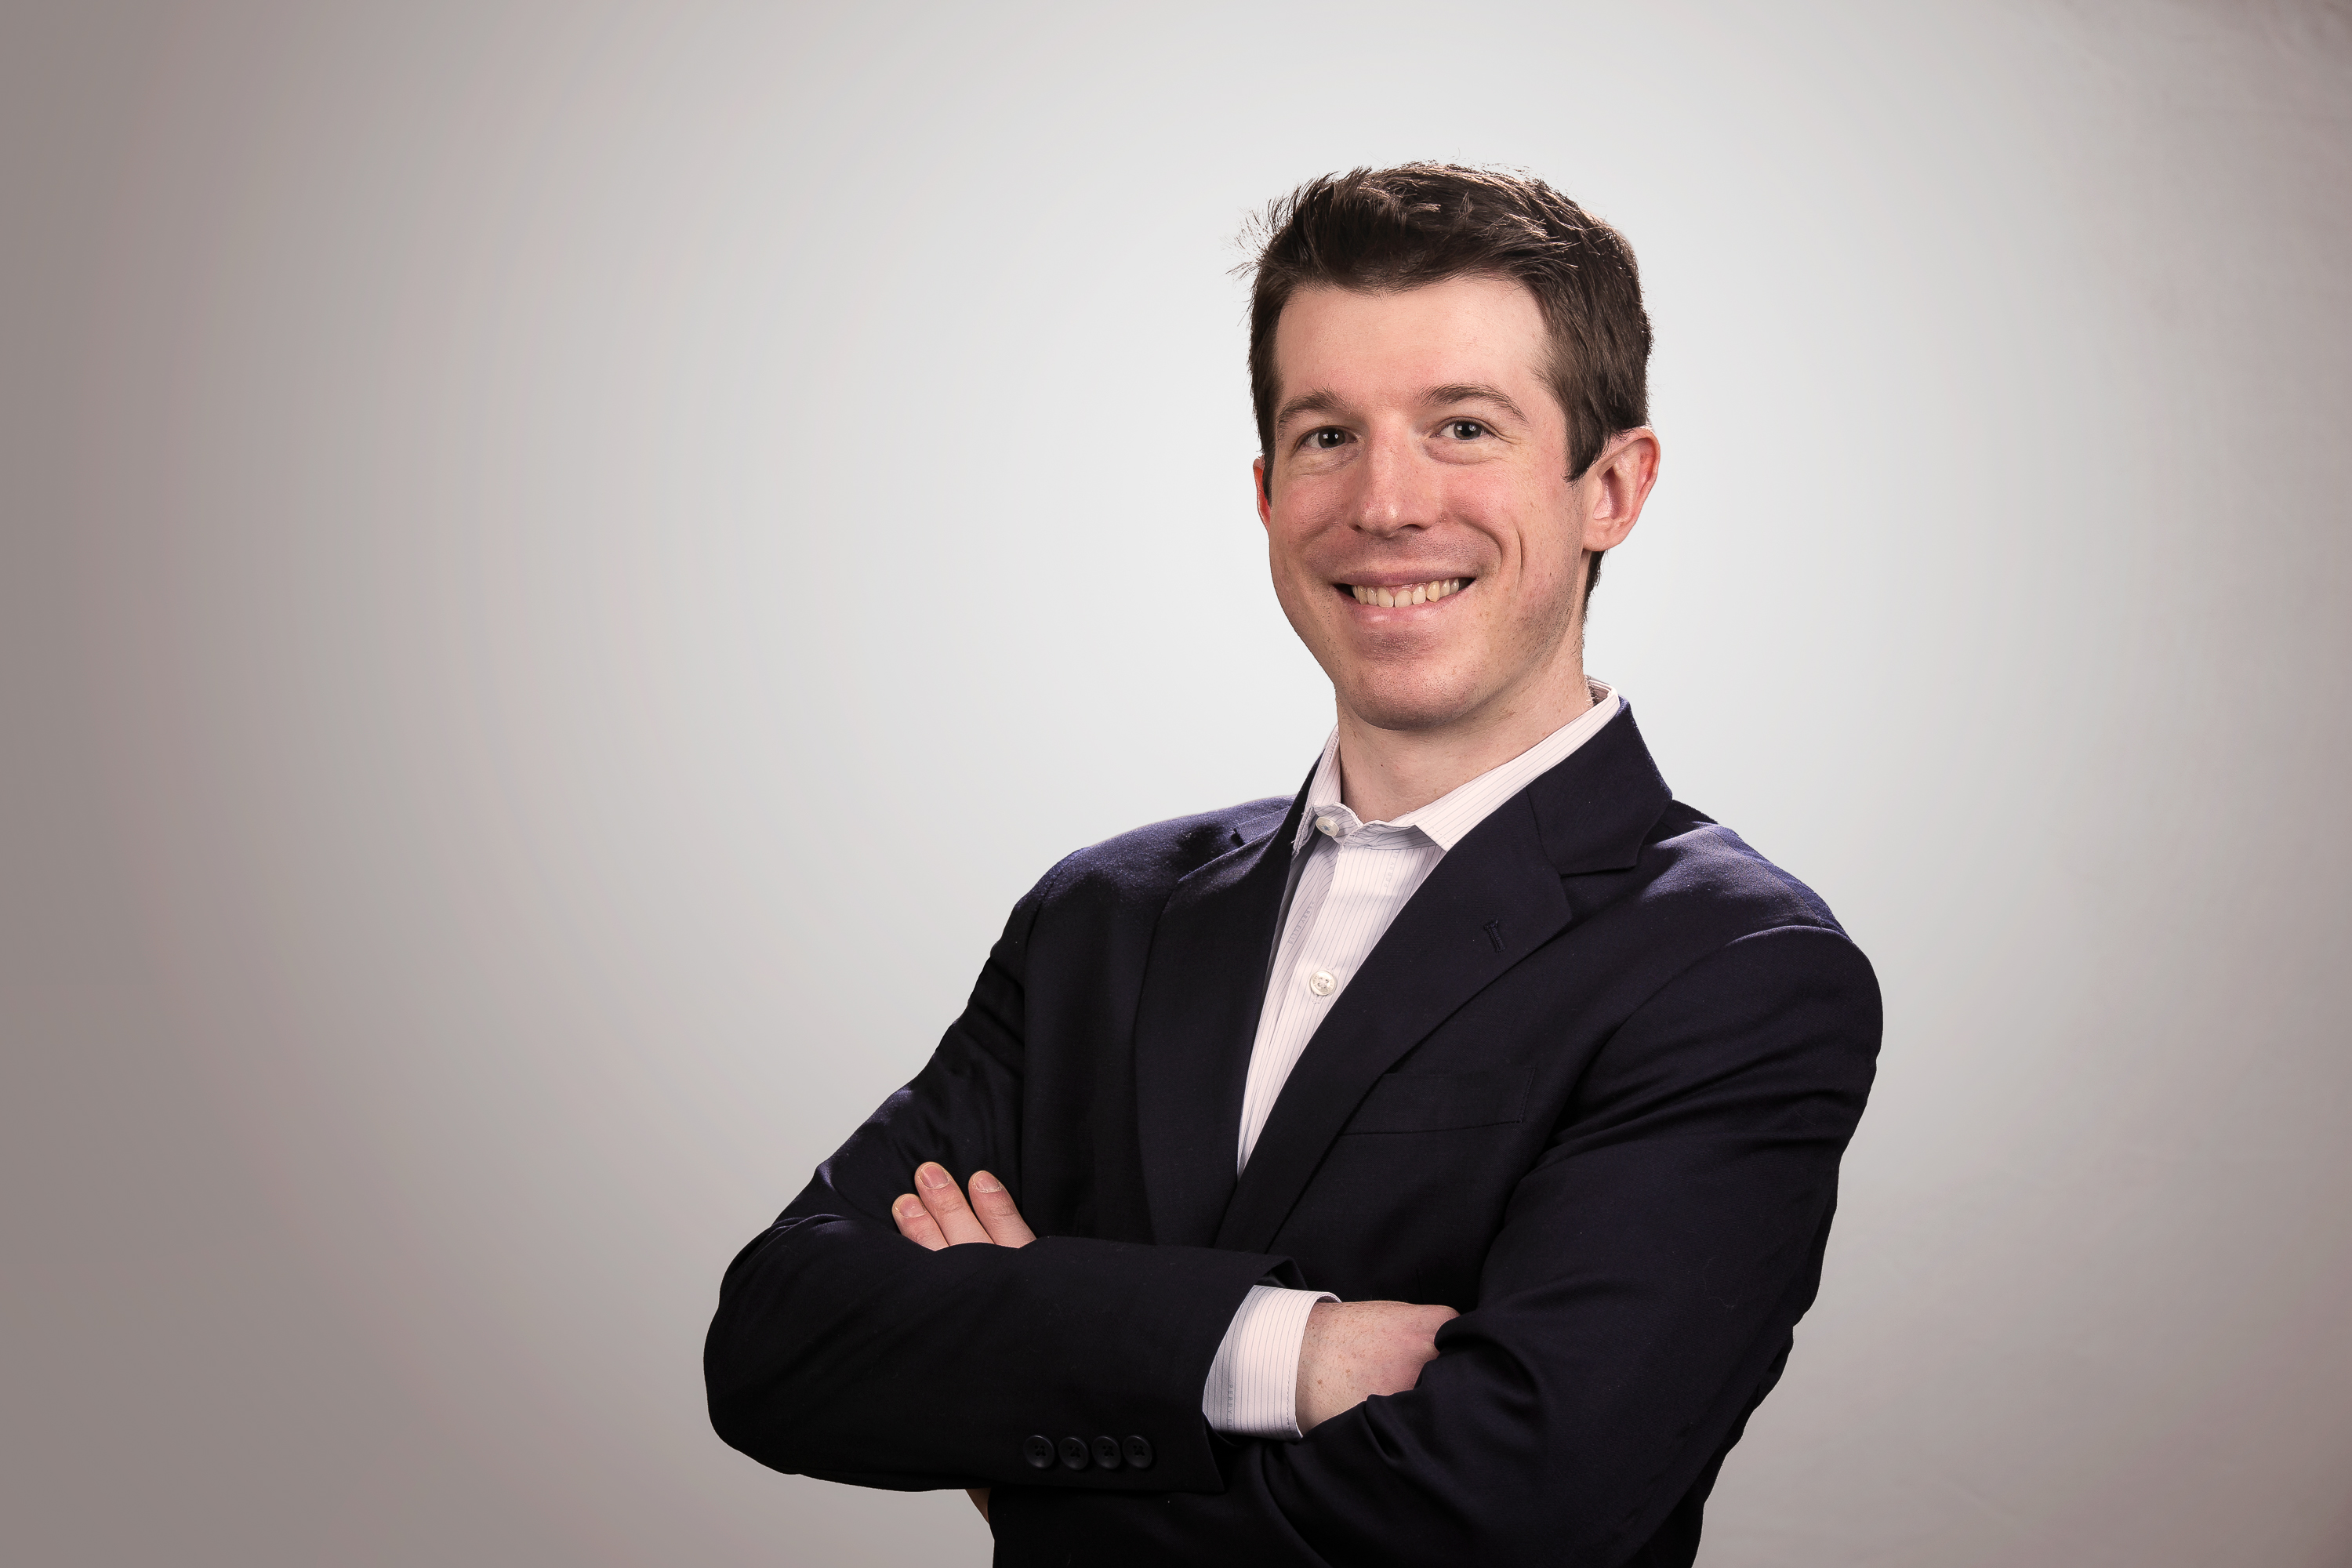 Studio-lit light professional photo of a young business man